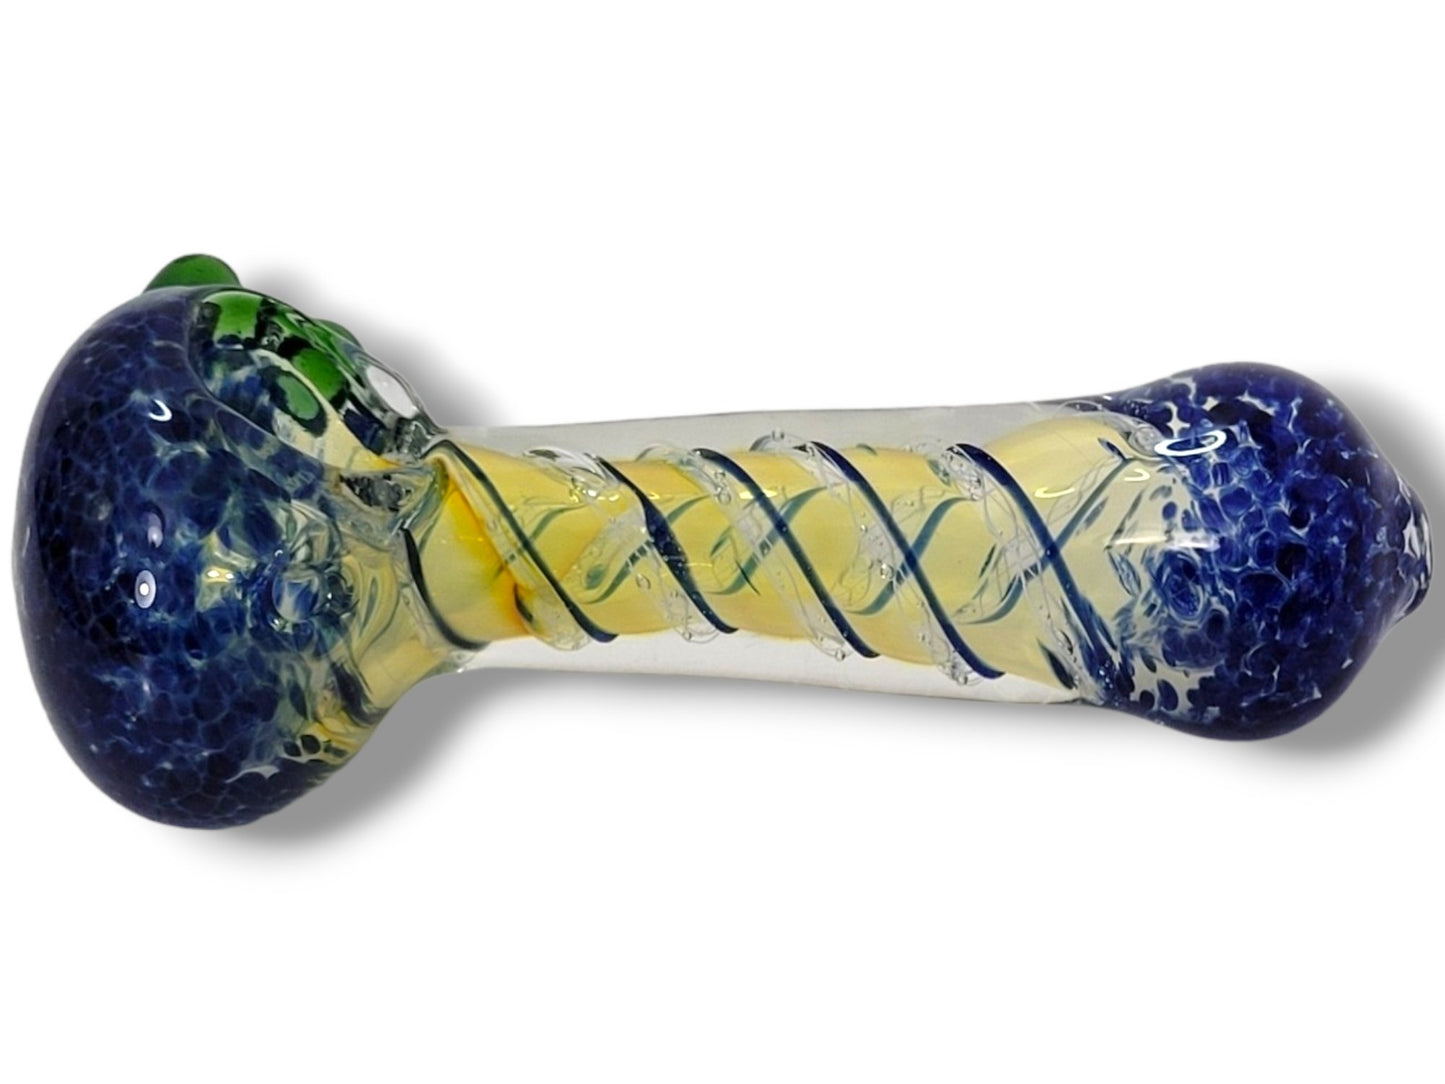 4" Spiral Glass Pipe - Canna Camp Supply Co